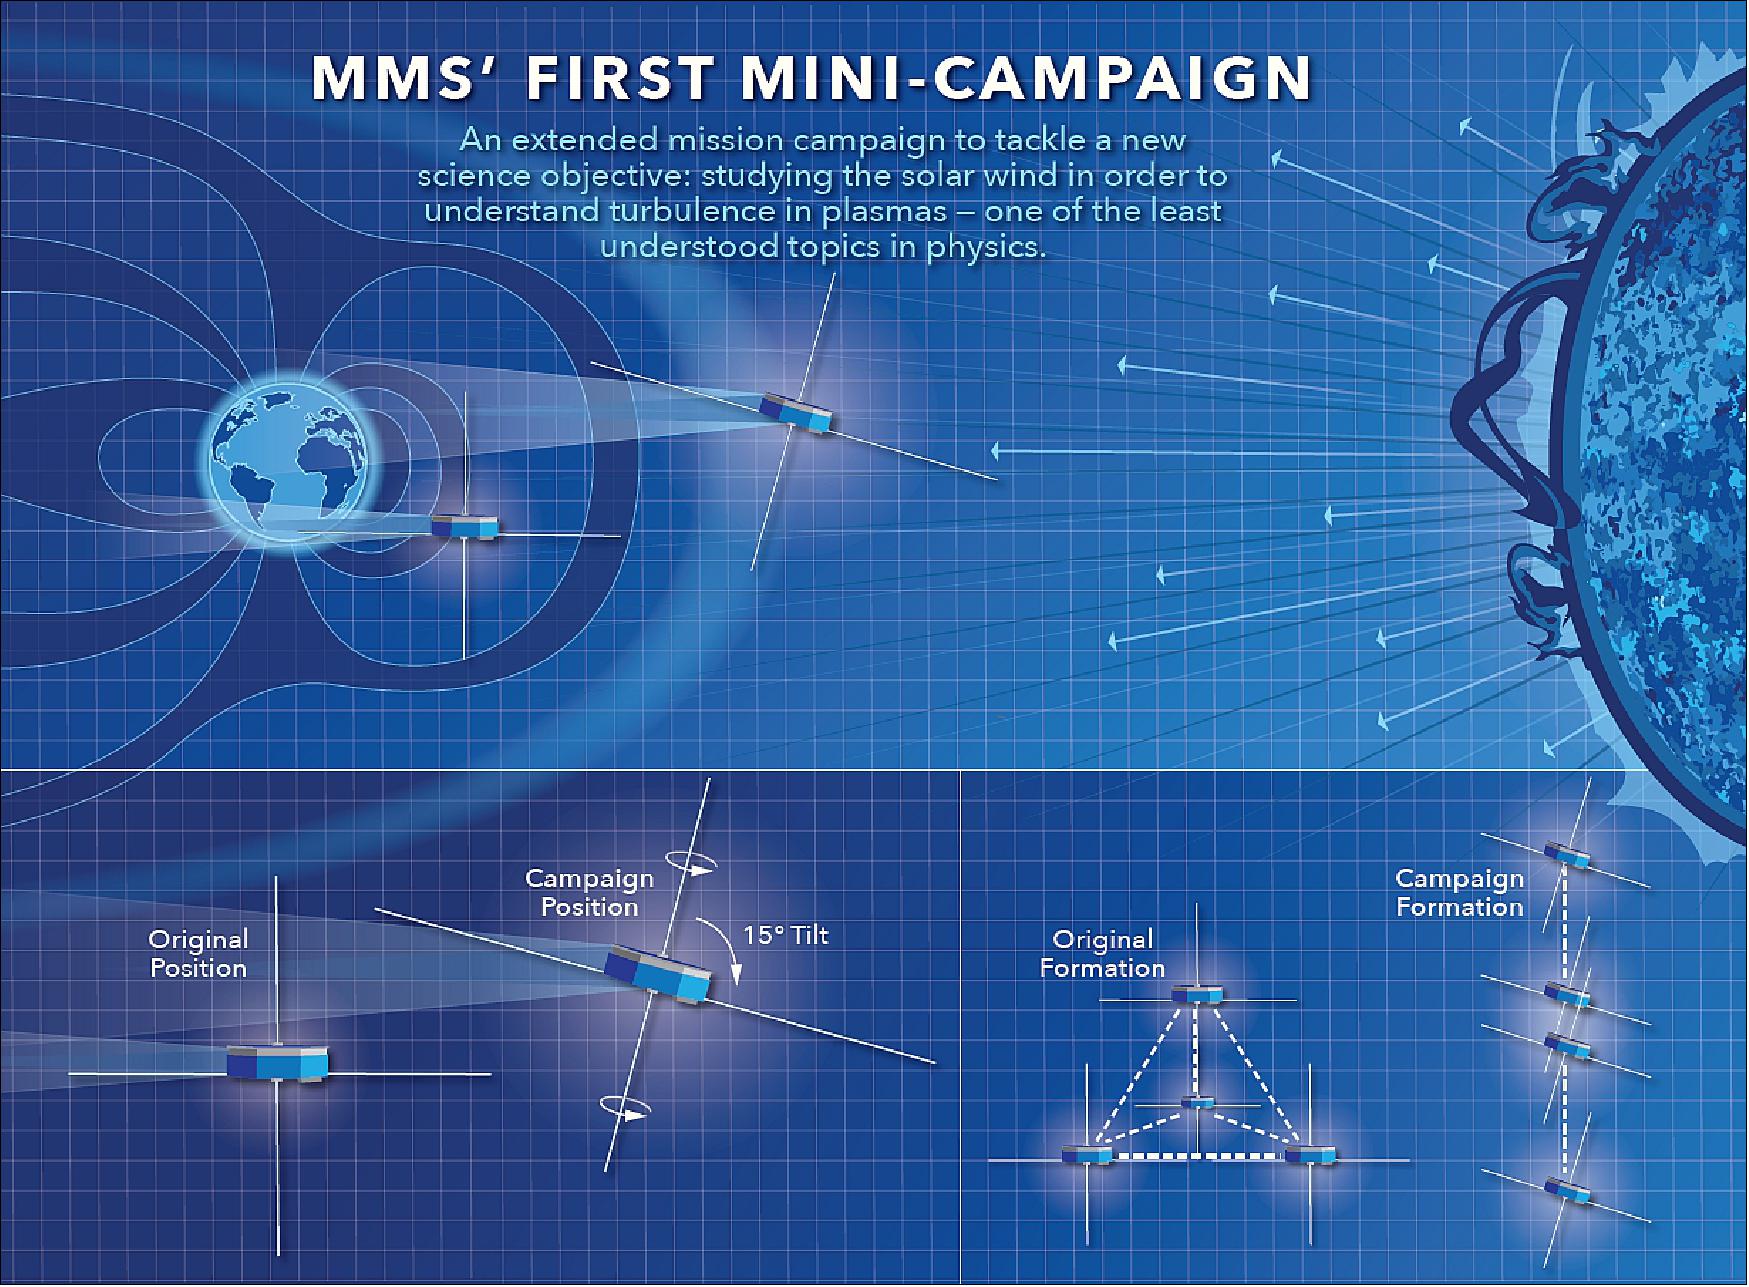 Figure 30: This infographic compares the four MMS spacecraft's normal orientation and formation to the orientation and formation for the mission's first mini-campaign to study turbulence in the solar wind (image credit: NASA's Goddard Space Flight Center/Mary Pat Hrybyk-Keith)